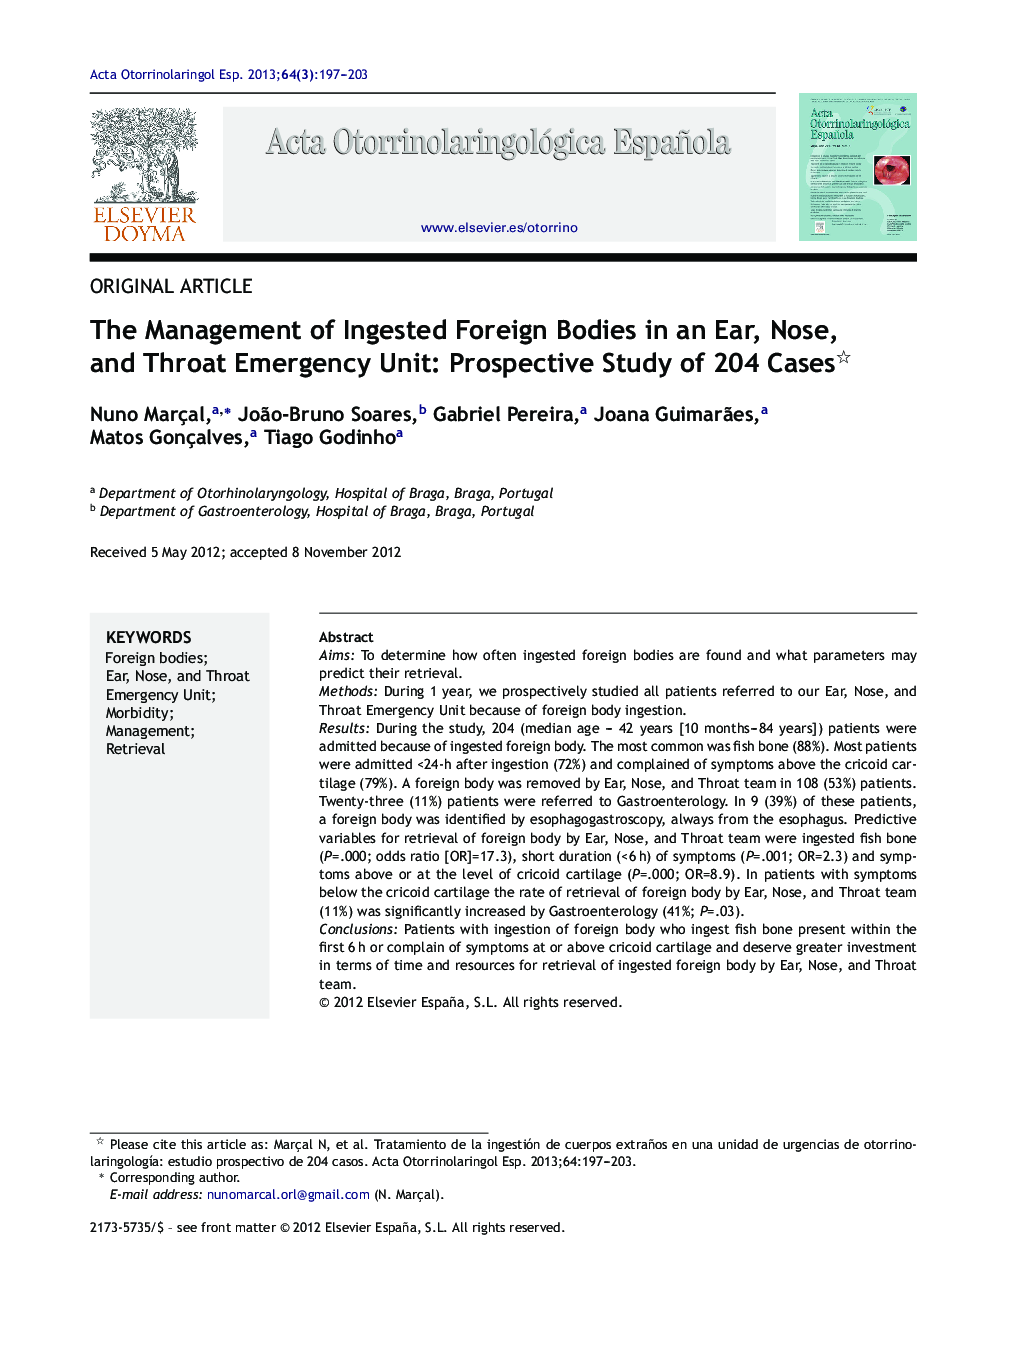 The Management of Ingested Foreign Bodies in an Ear, Nose, and Throat Emergency Unit: Prospective Study of 204 Cases 